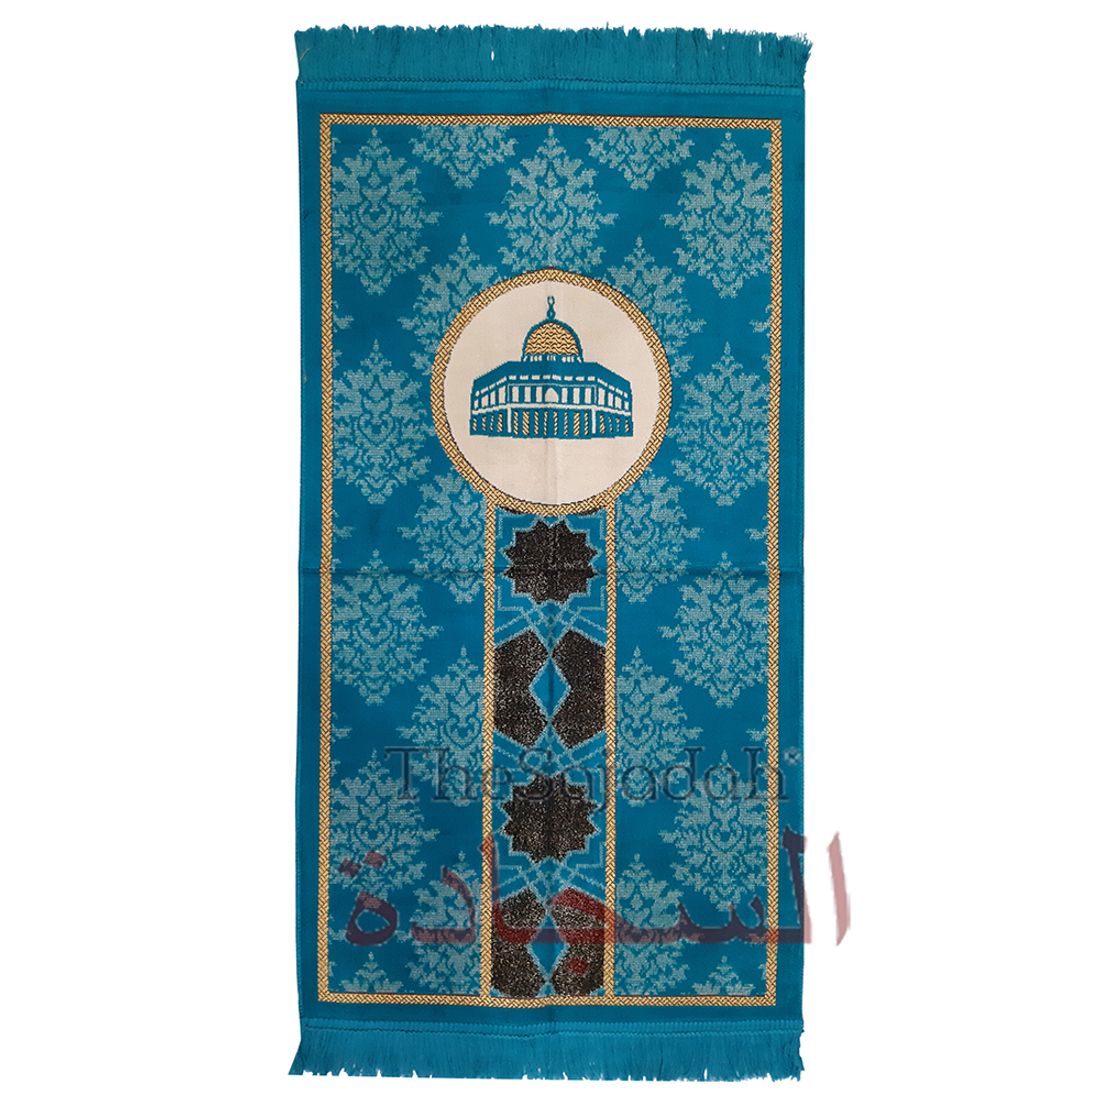 Turquoise Blue & Black Mosque Circle Glitter Ribbon Small Prayer Rug 20x40in (51x102cm)